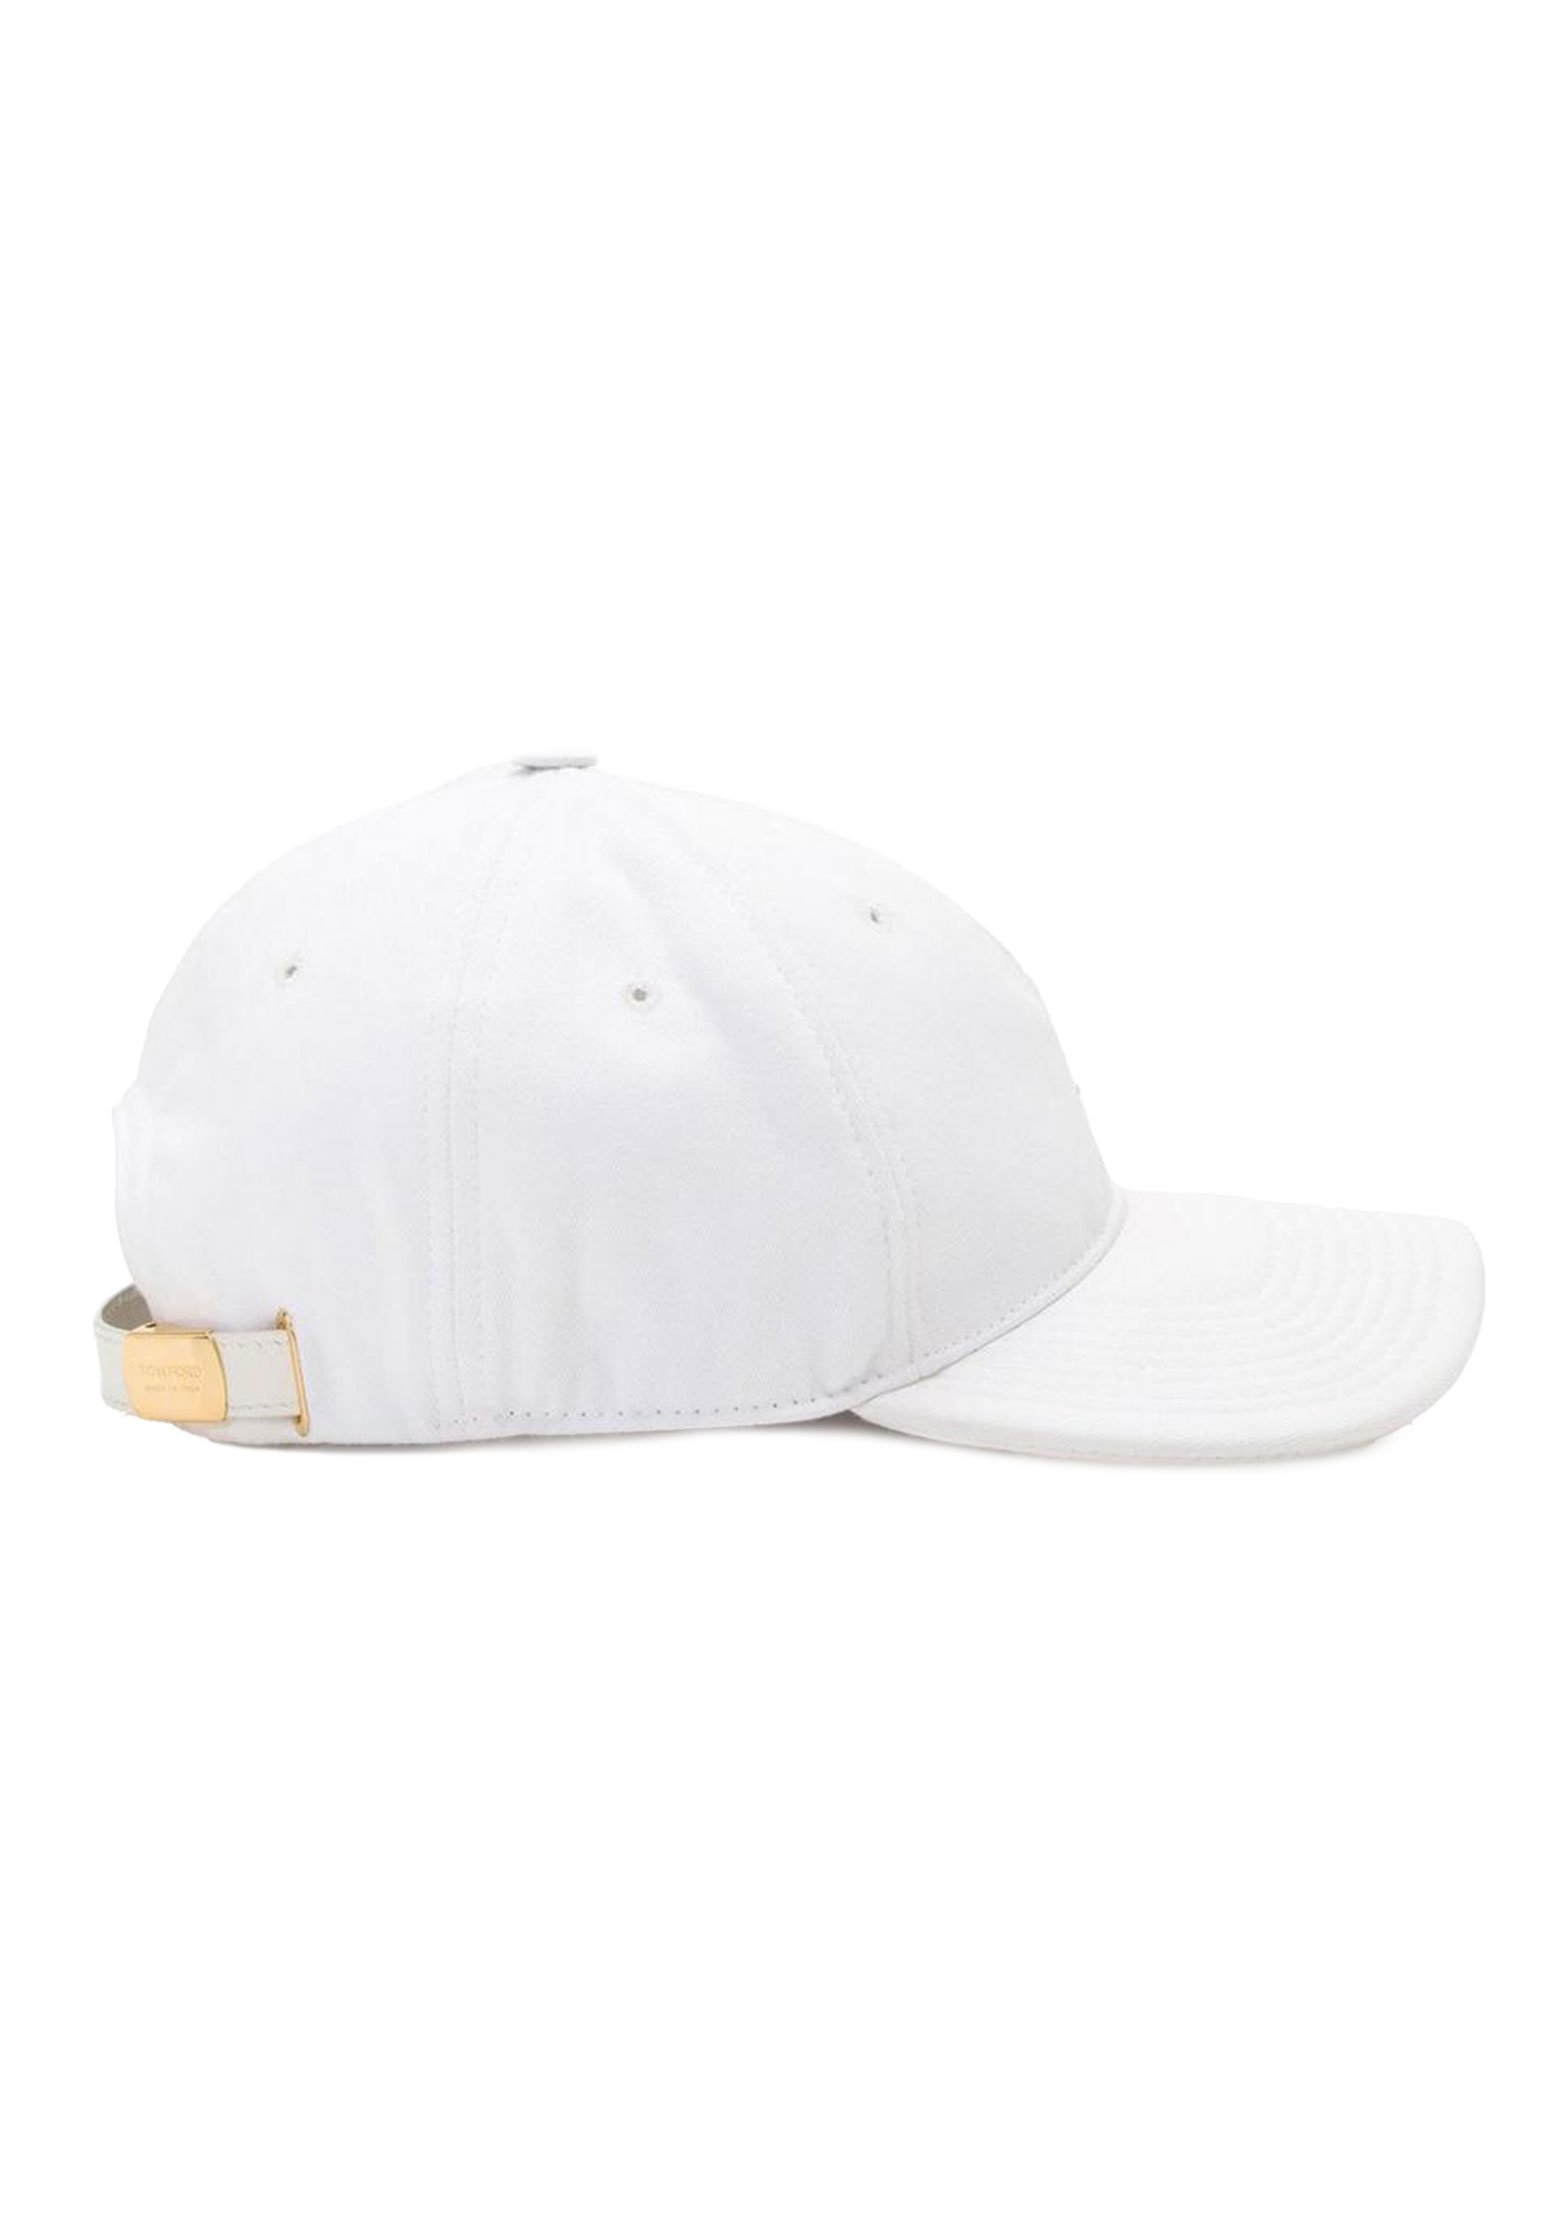 Cap TOM FORD Color: white (Code: 2992) in online store Allure